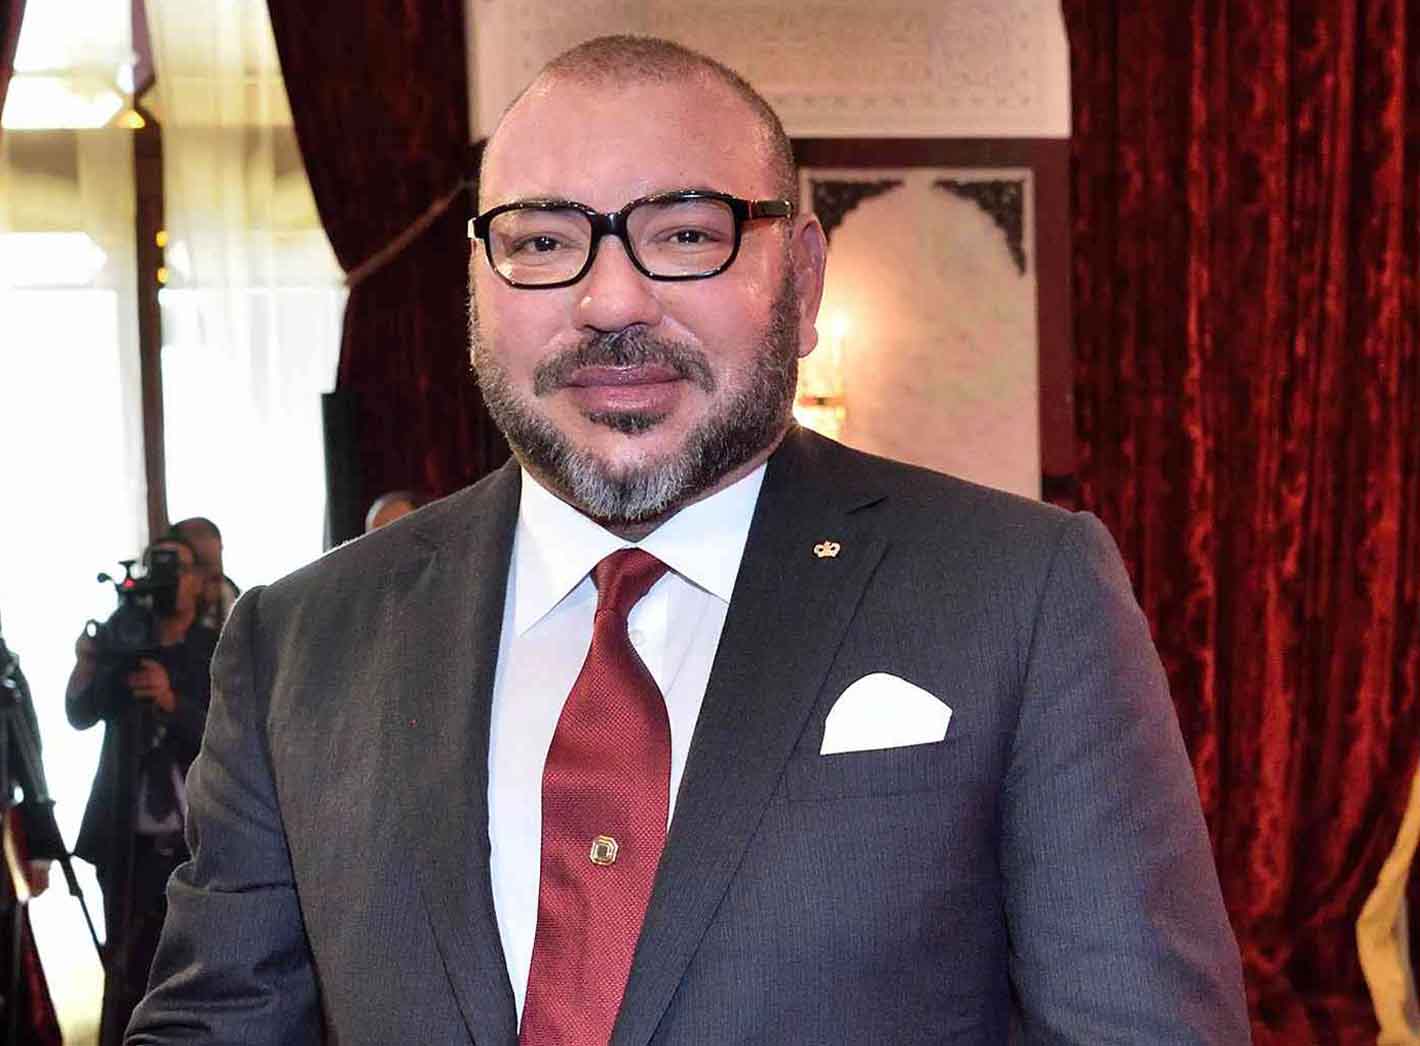 King Mohammed VI of Morocco. Image from archive.